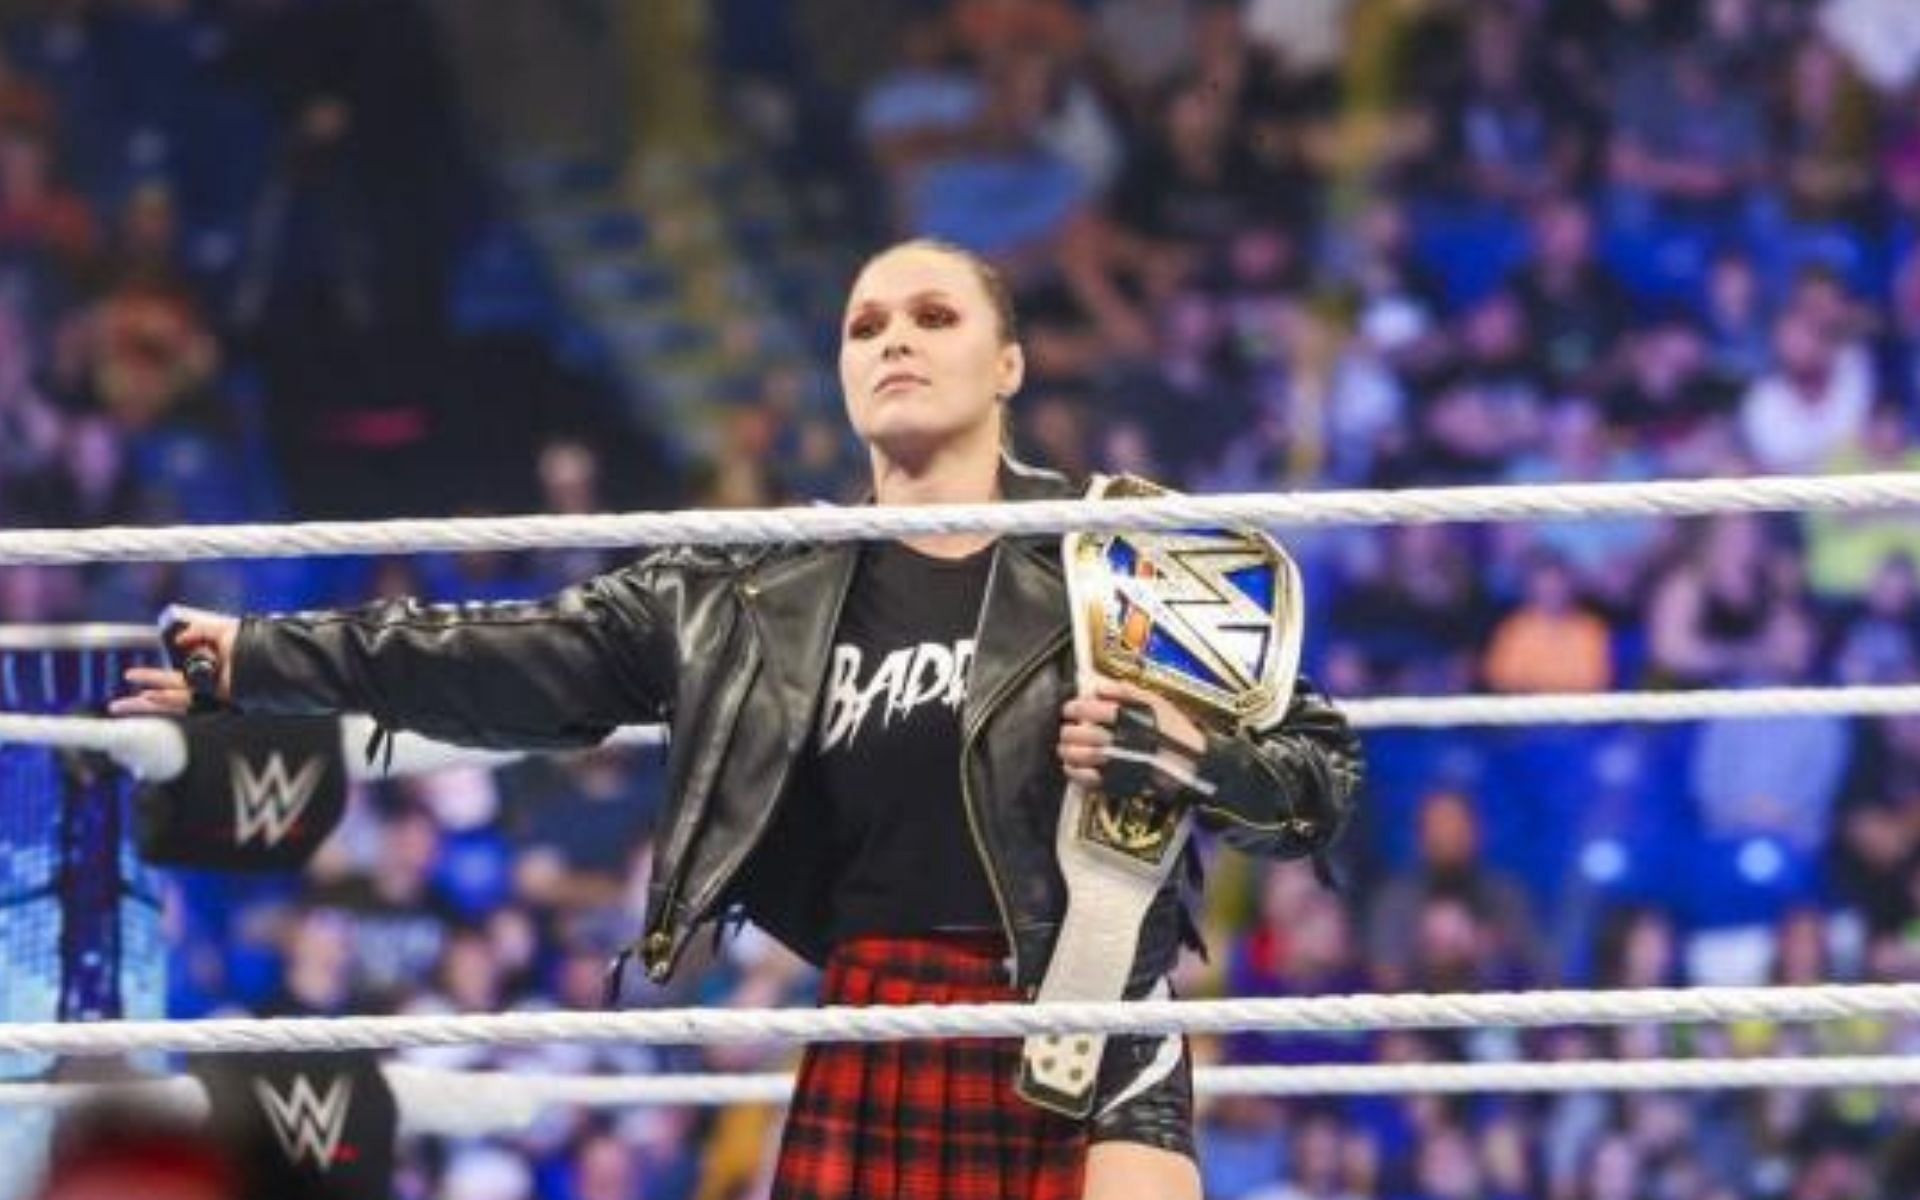 Ronda Rousey issued an open challenge on an edition of SmackDown